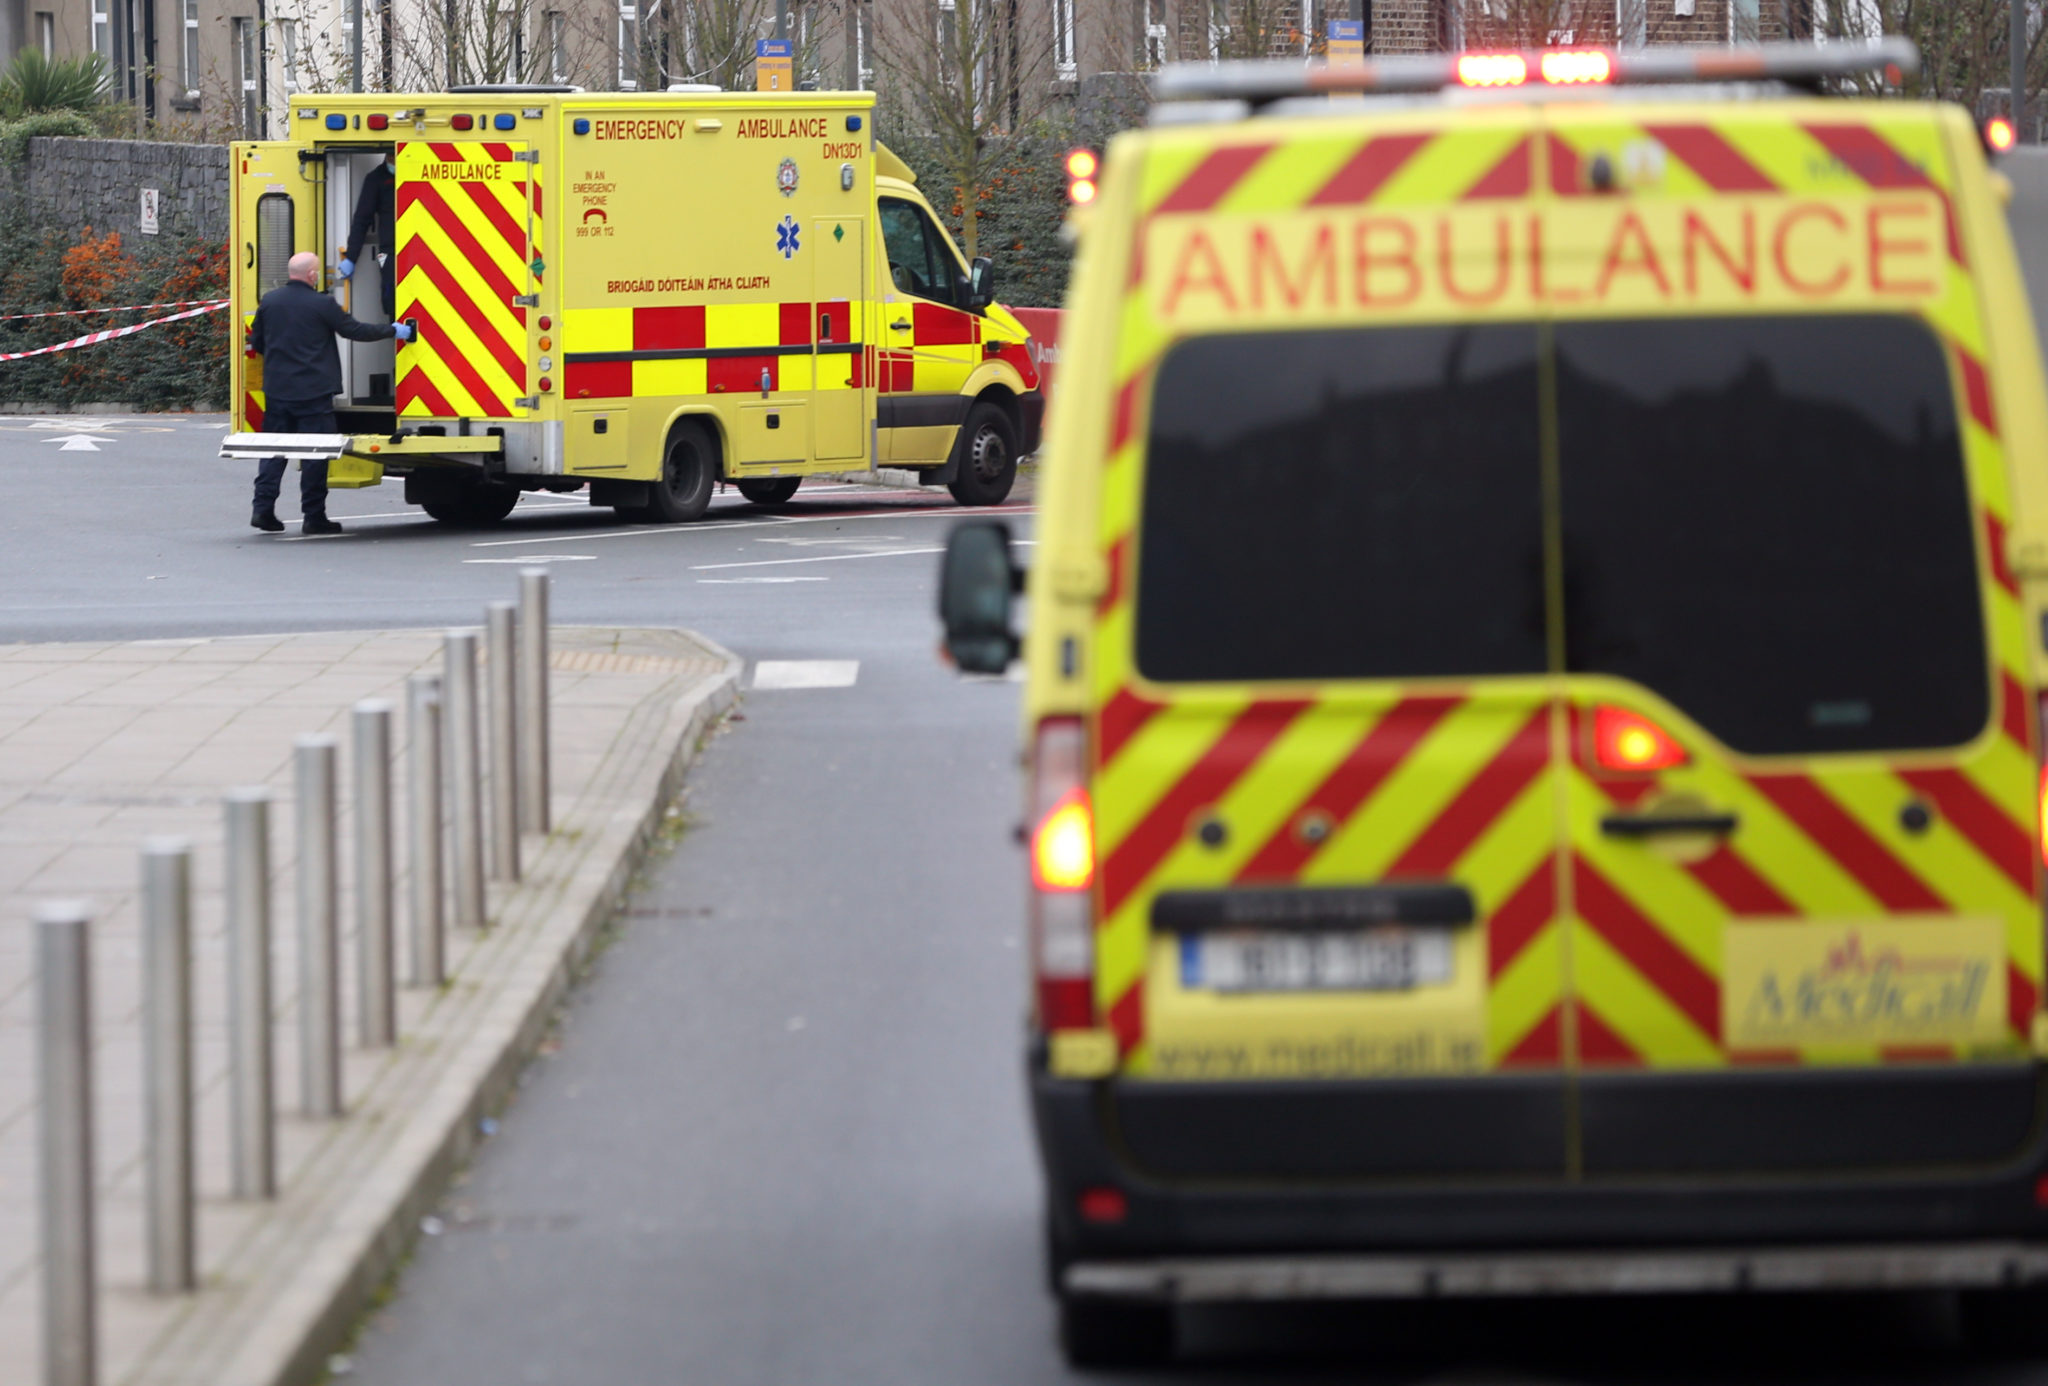 Ambulances with health care workers wearing face masks bring patients into the Mater Hospital in Dublin